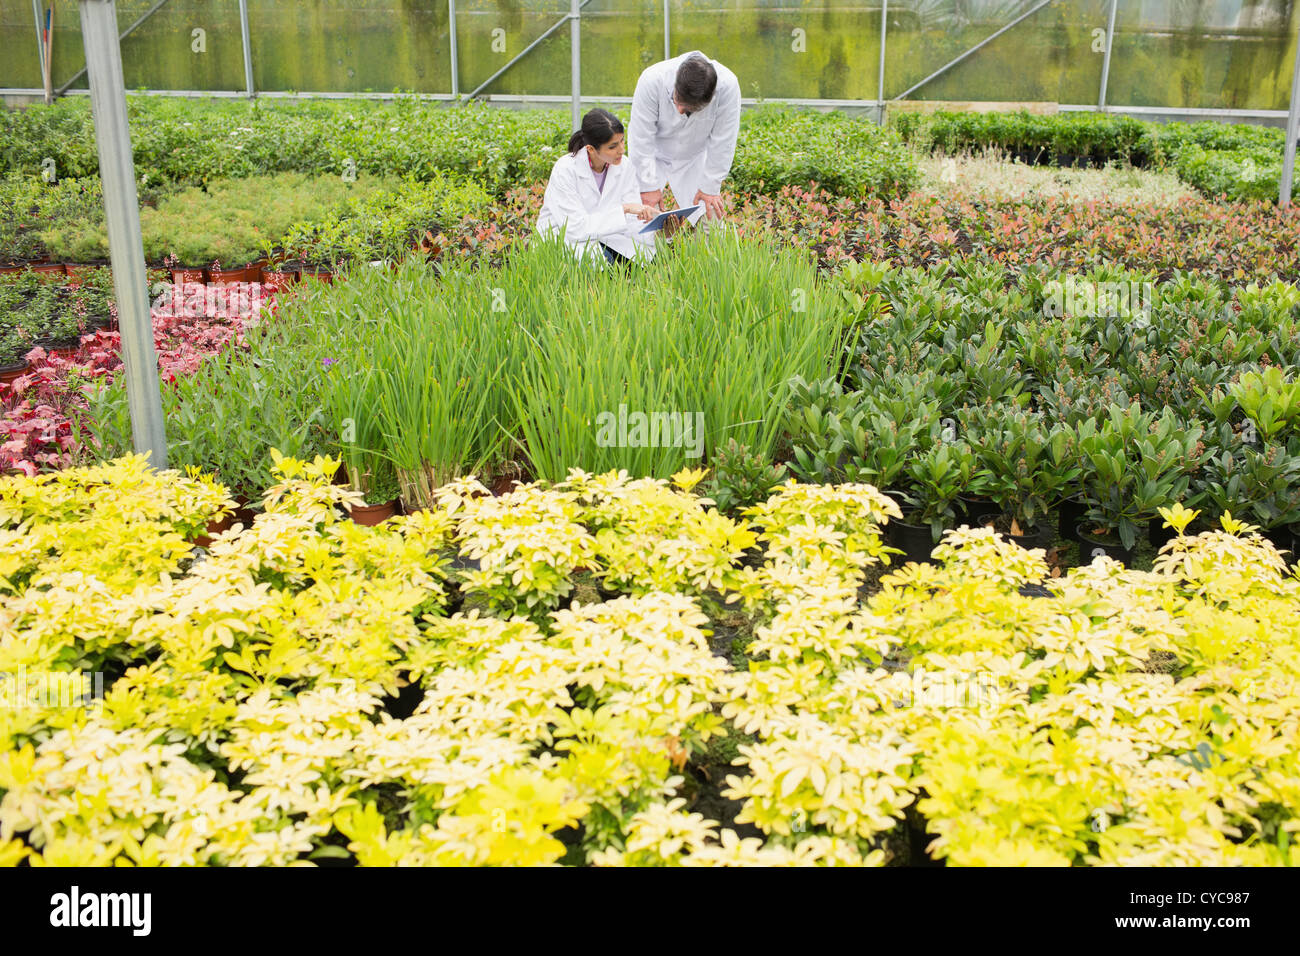 Two people in lab coats checking the plants Stock Photo